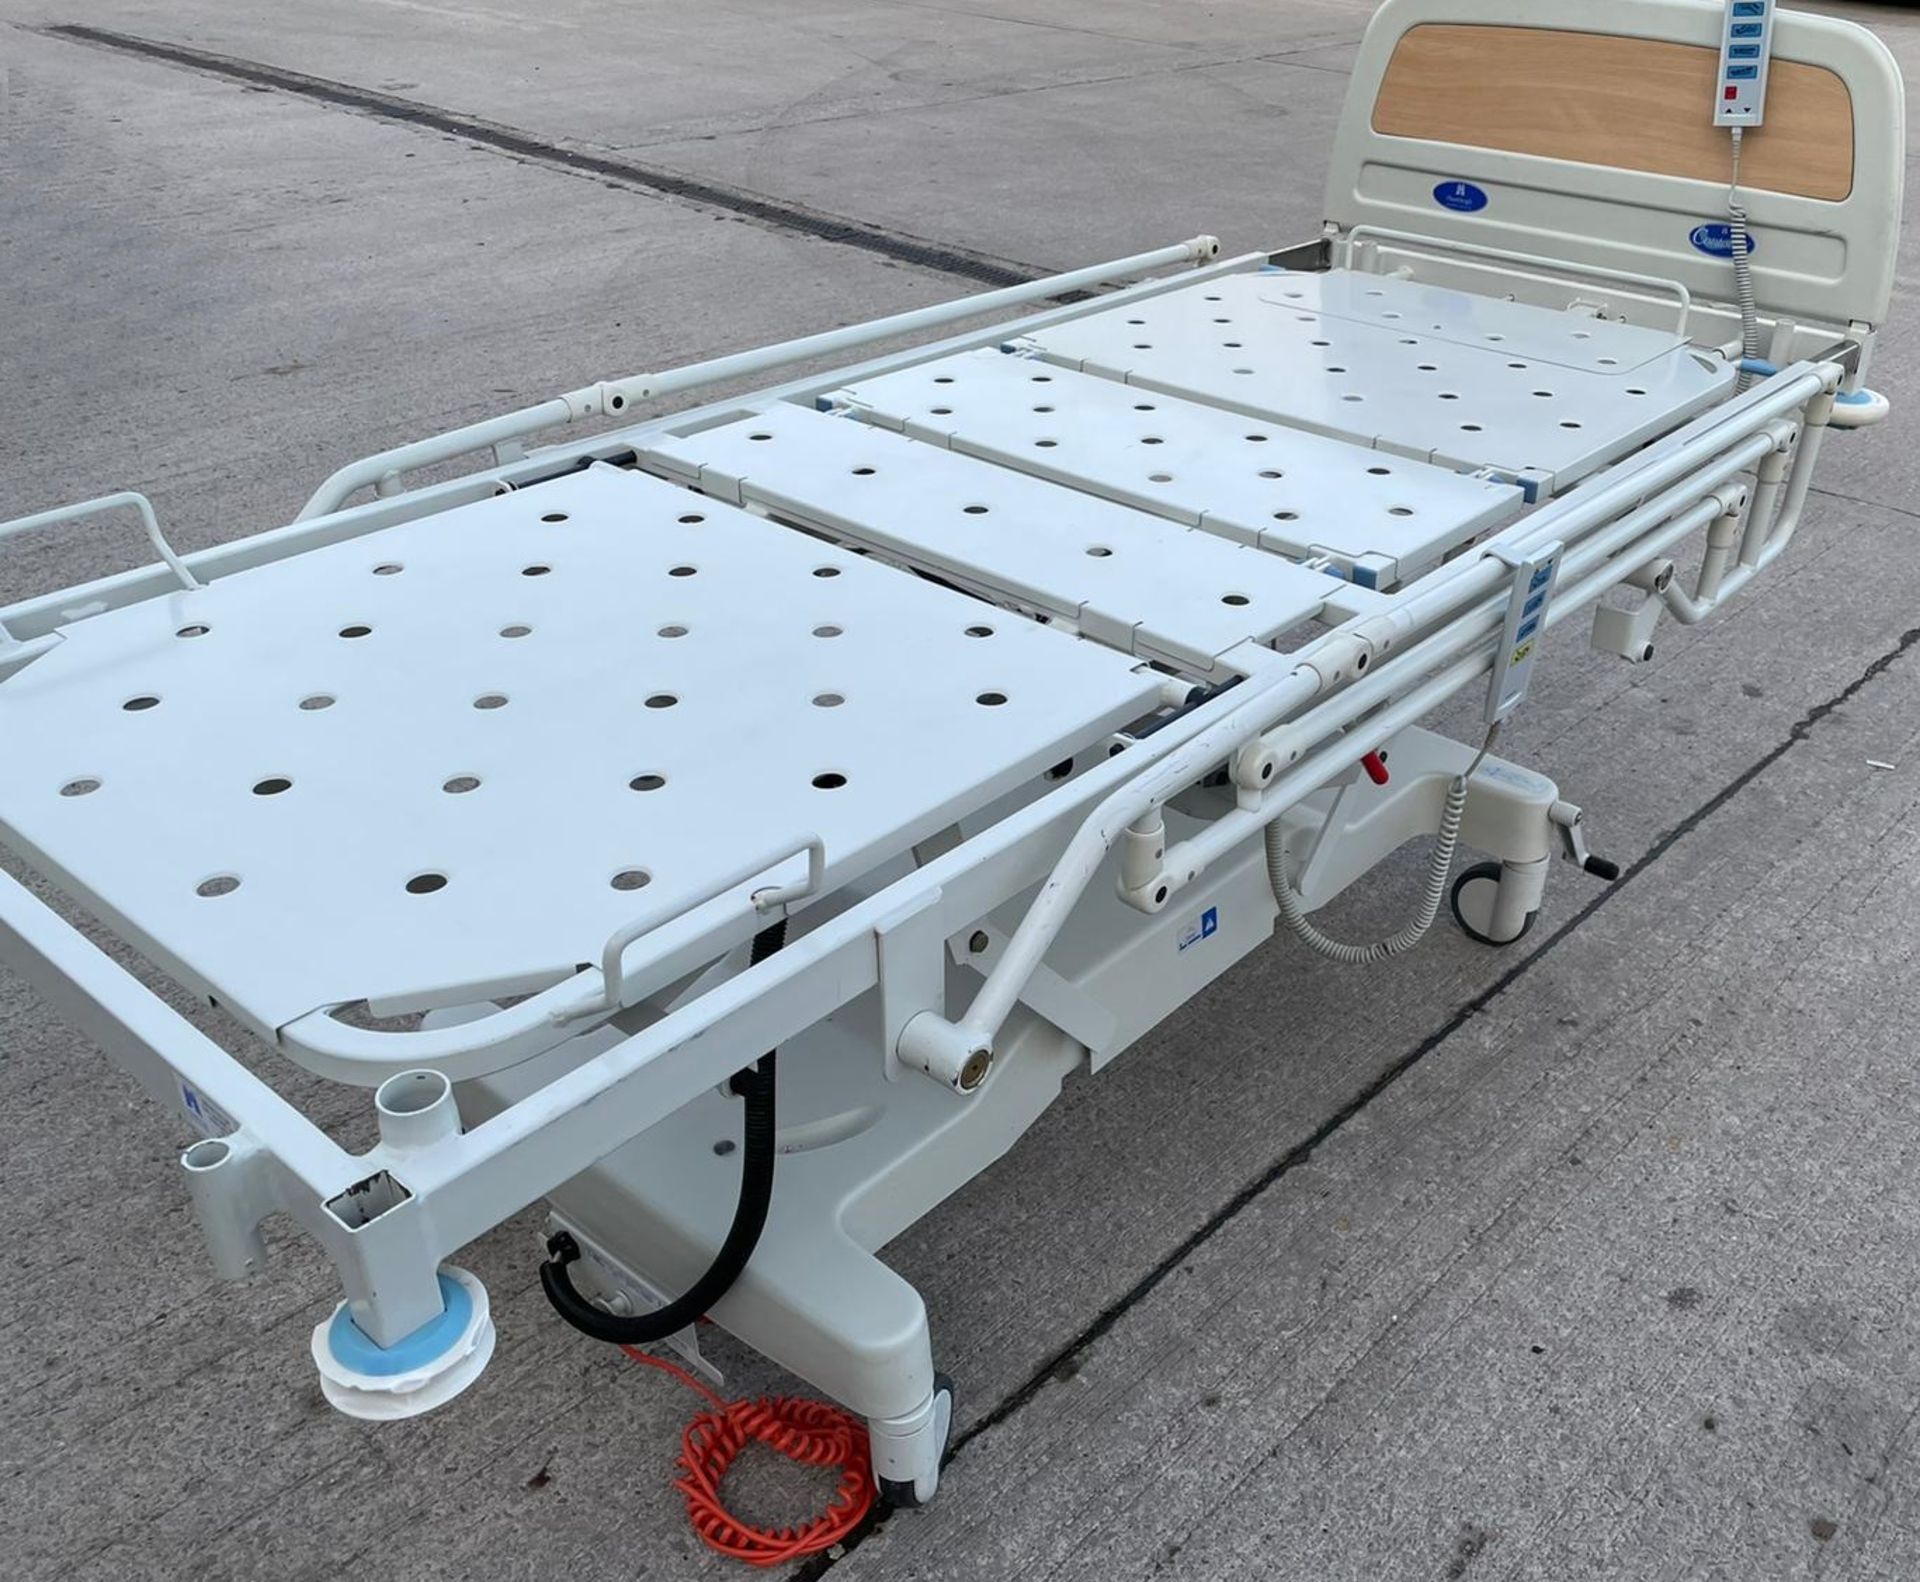 1 x Huntleigh CONTOURA Electric Hospital Bed - Features Rise/Fall 3-Way Profiling, Side Rails, - Image 2 of 16